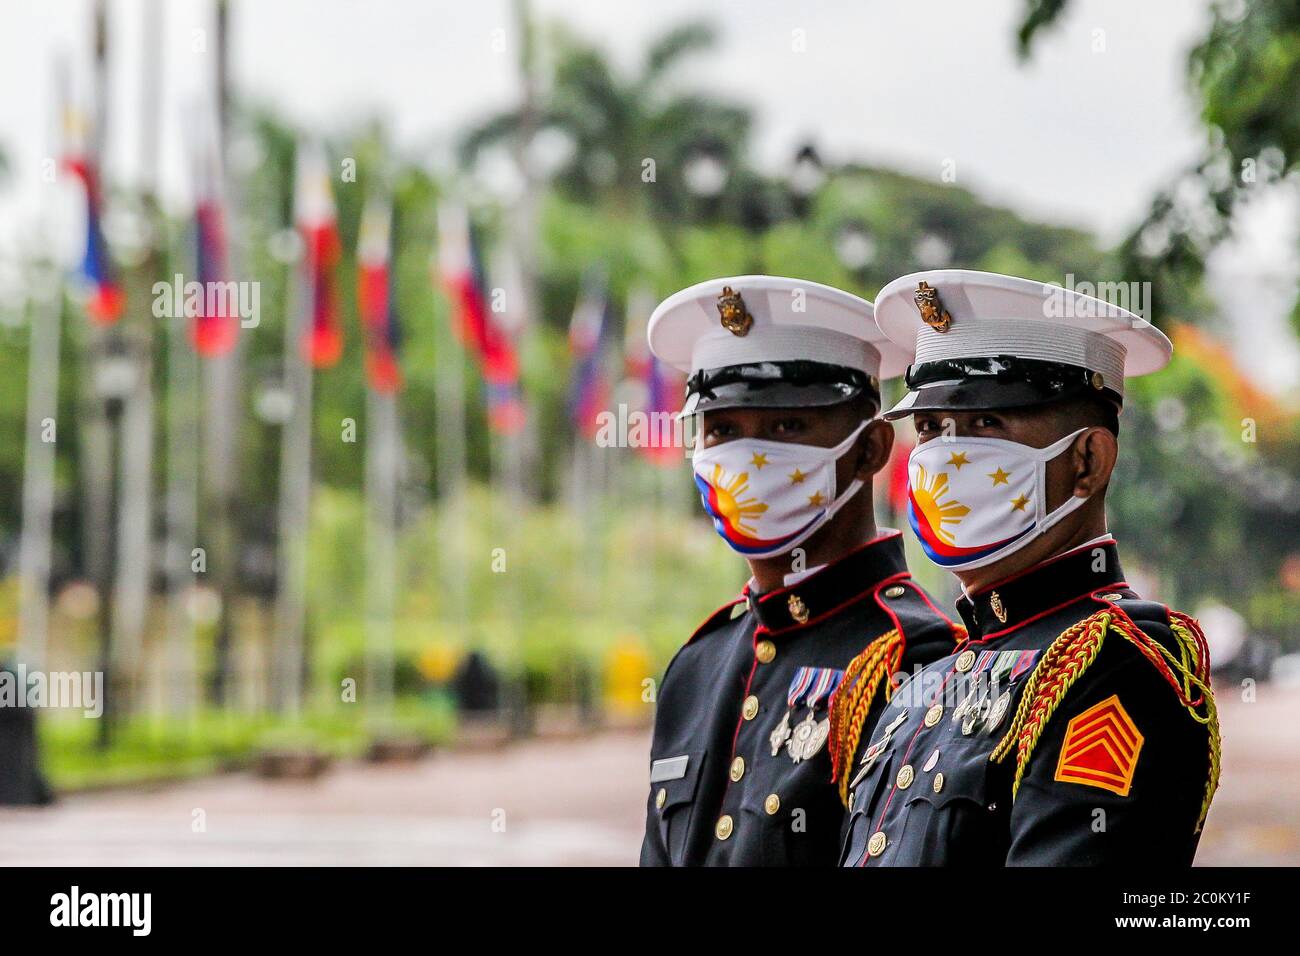 Manila 12th June Officers From The Philippine Navy Attend The Celebration Of The 122nd Philippine Independence Day In Manila The Philippines On June 12 The Philippines Celebrated The 122nd Anniversary